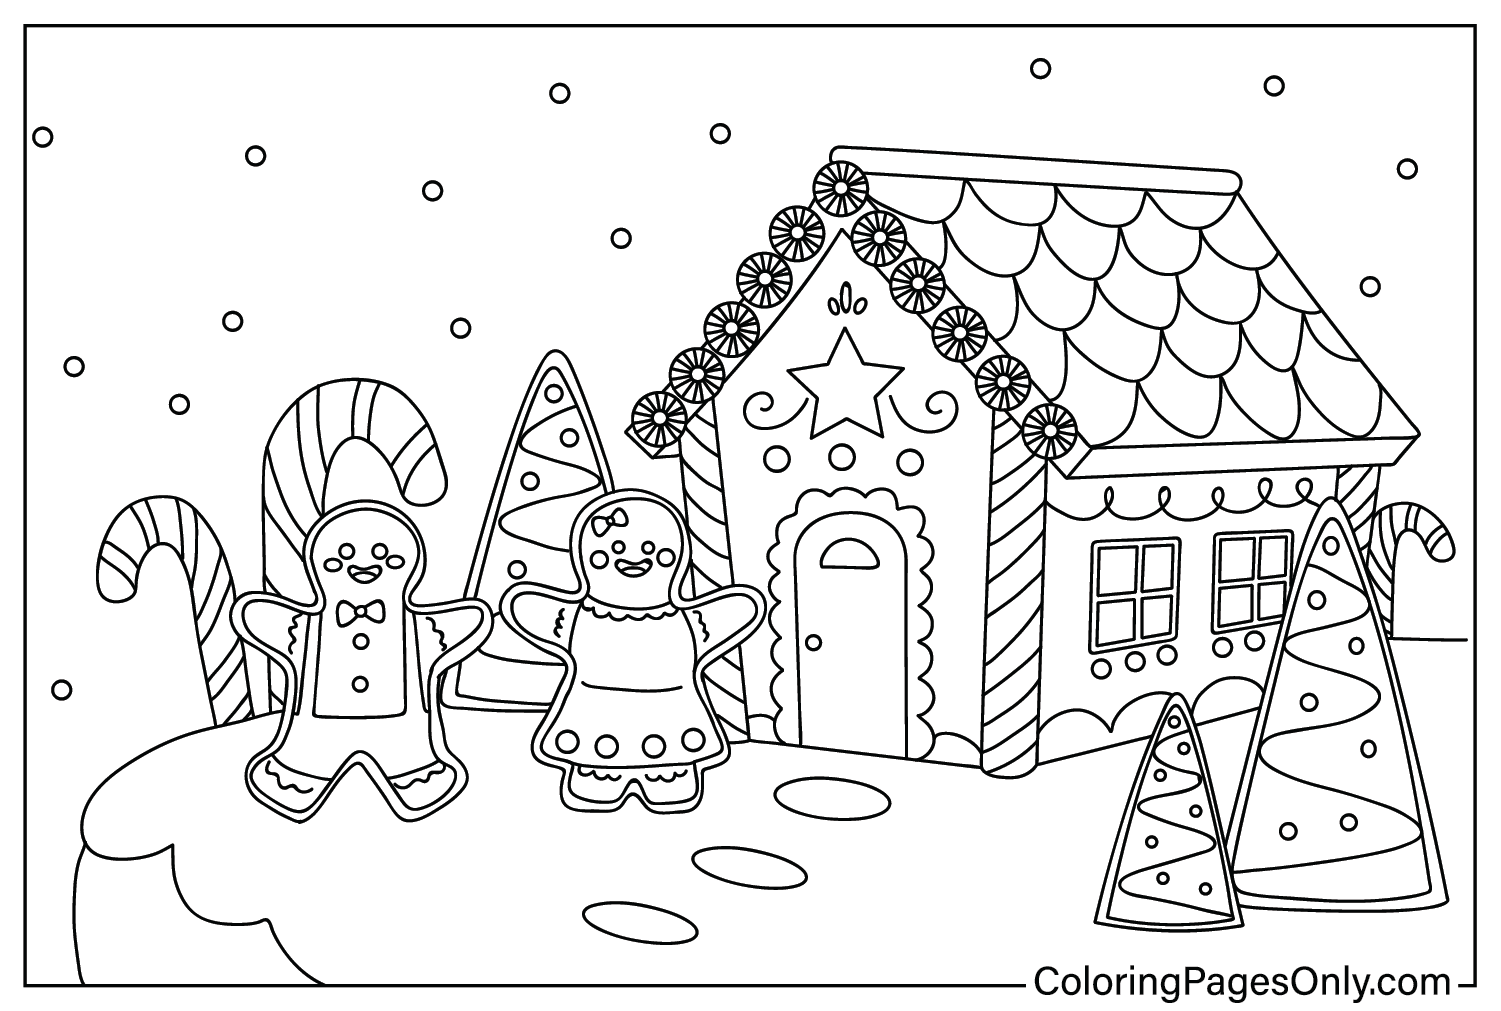 Coloring Page Gingerbread House from Gingerbread House